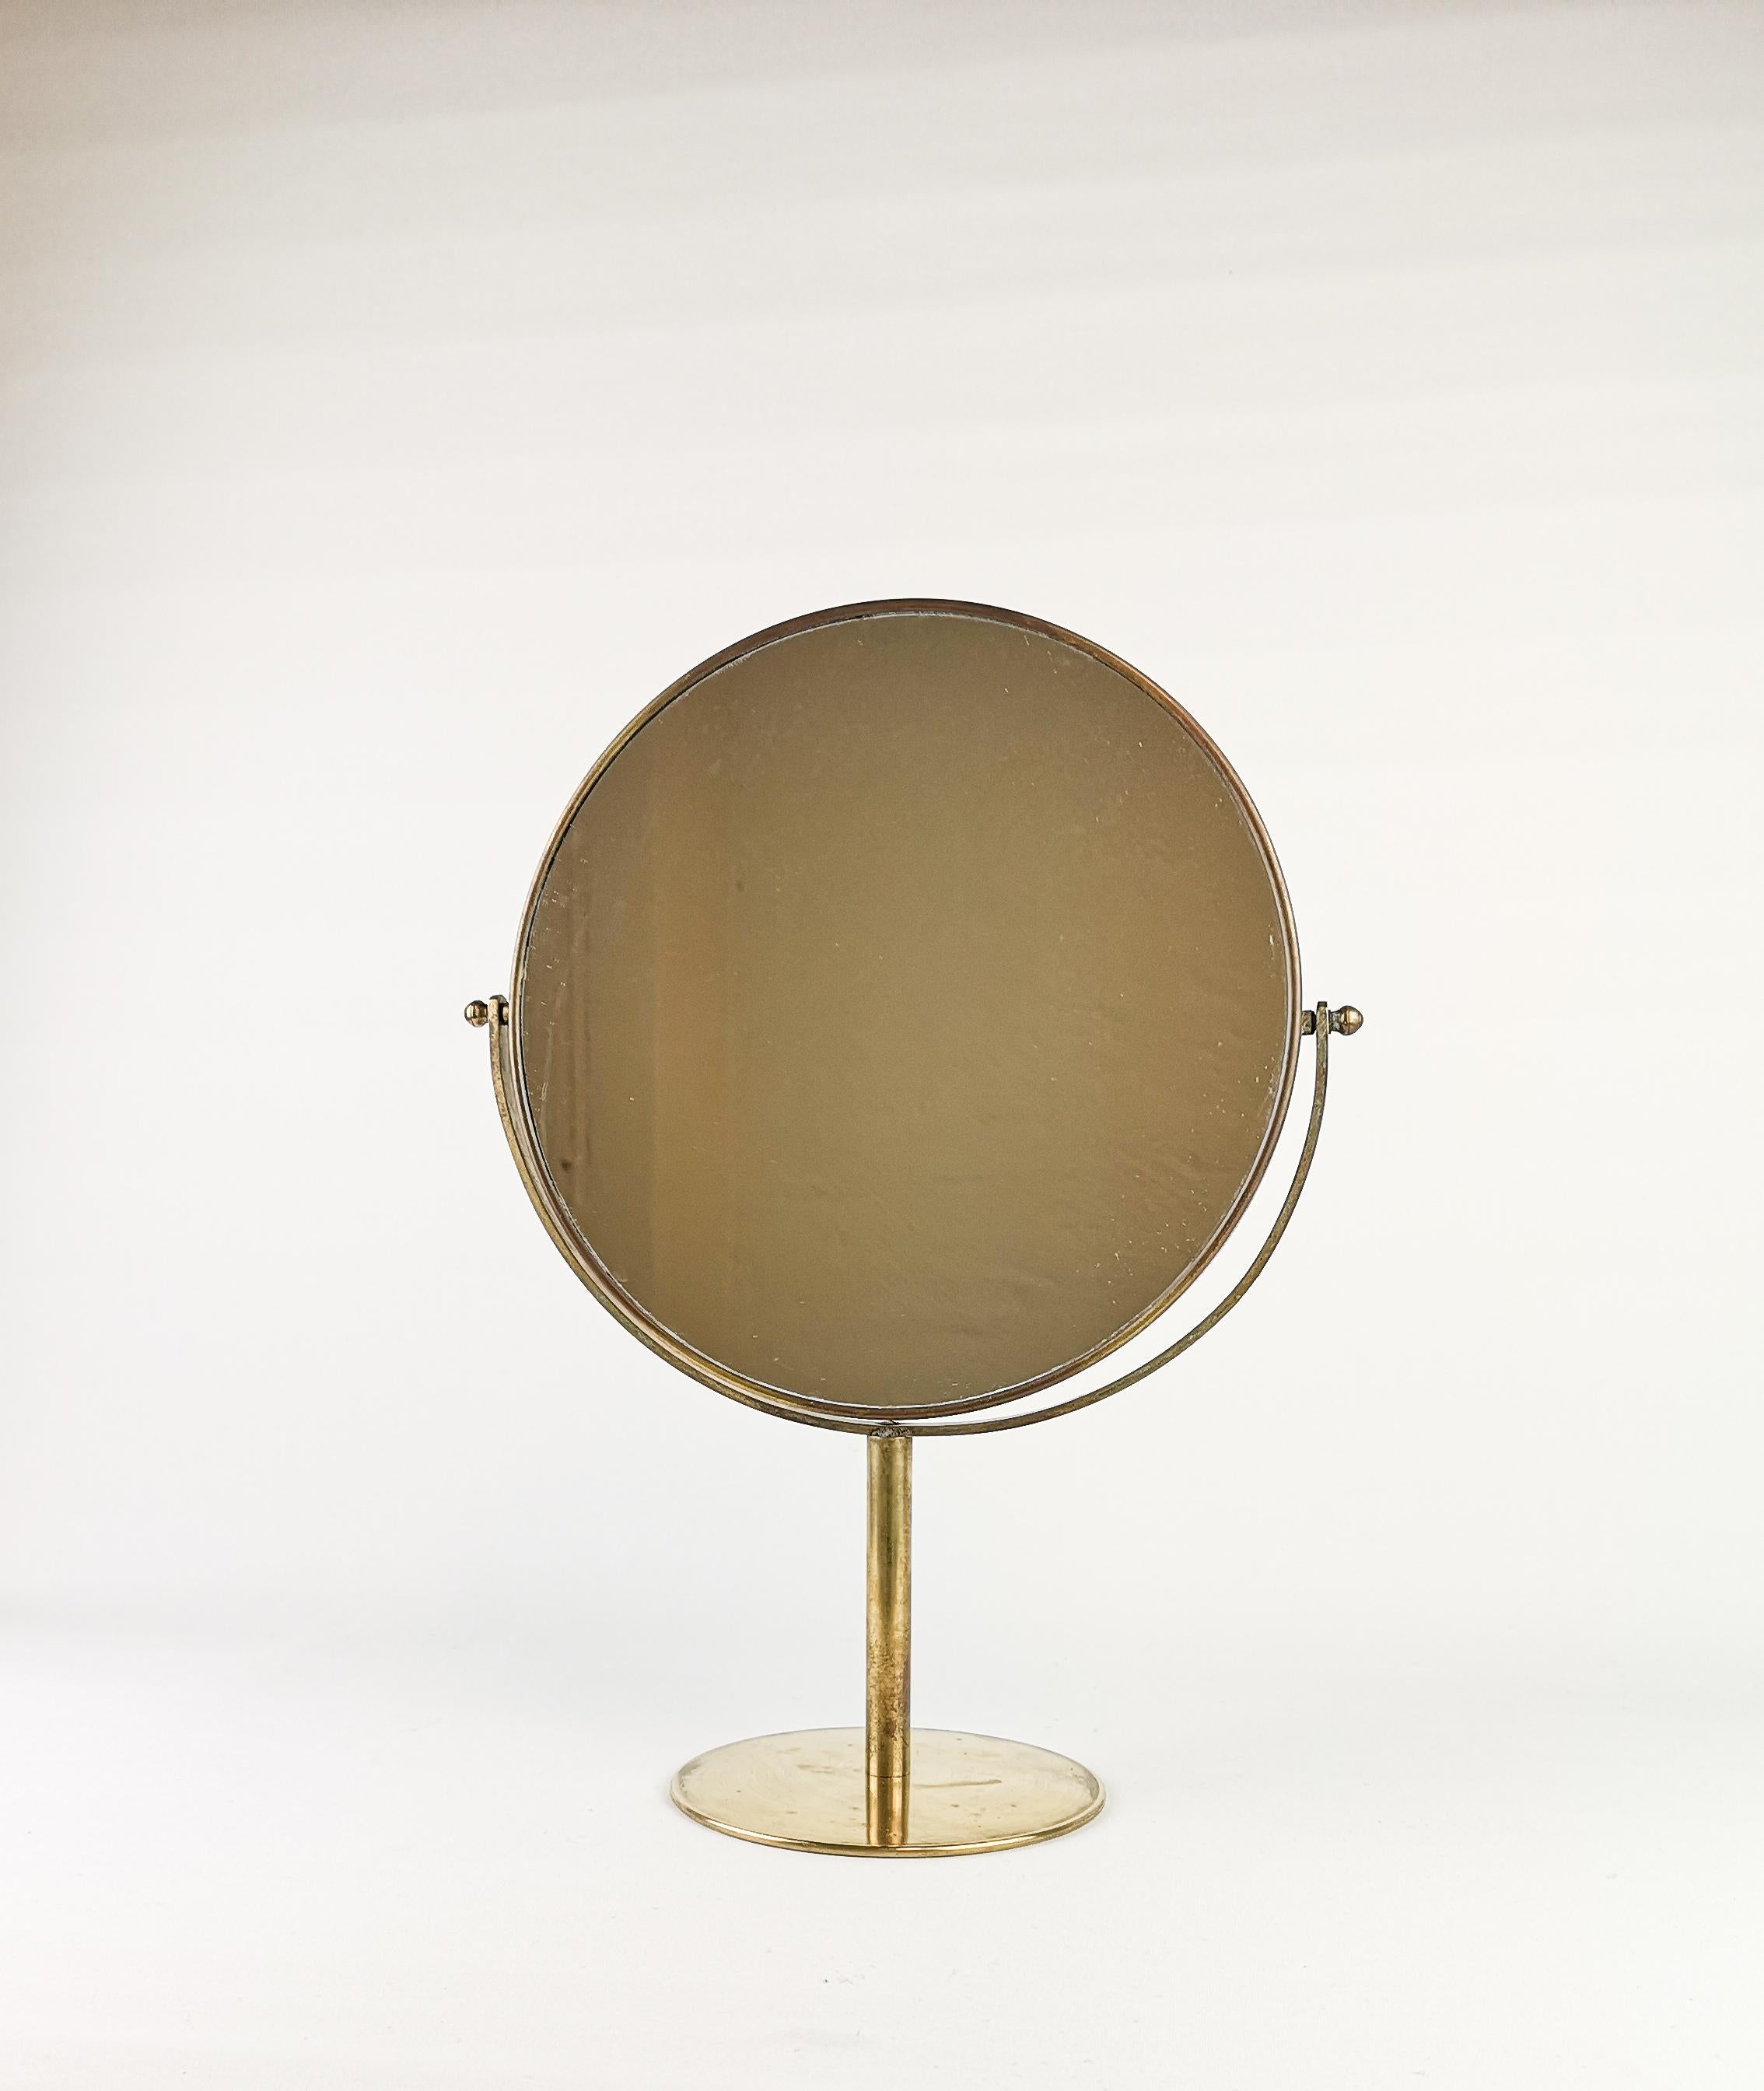 A wonderful vanity brass mirror made in Sweden possible for Svenk Tenn. Nice vintage use with sings of use but in very good condition.